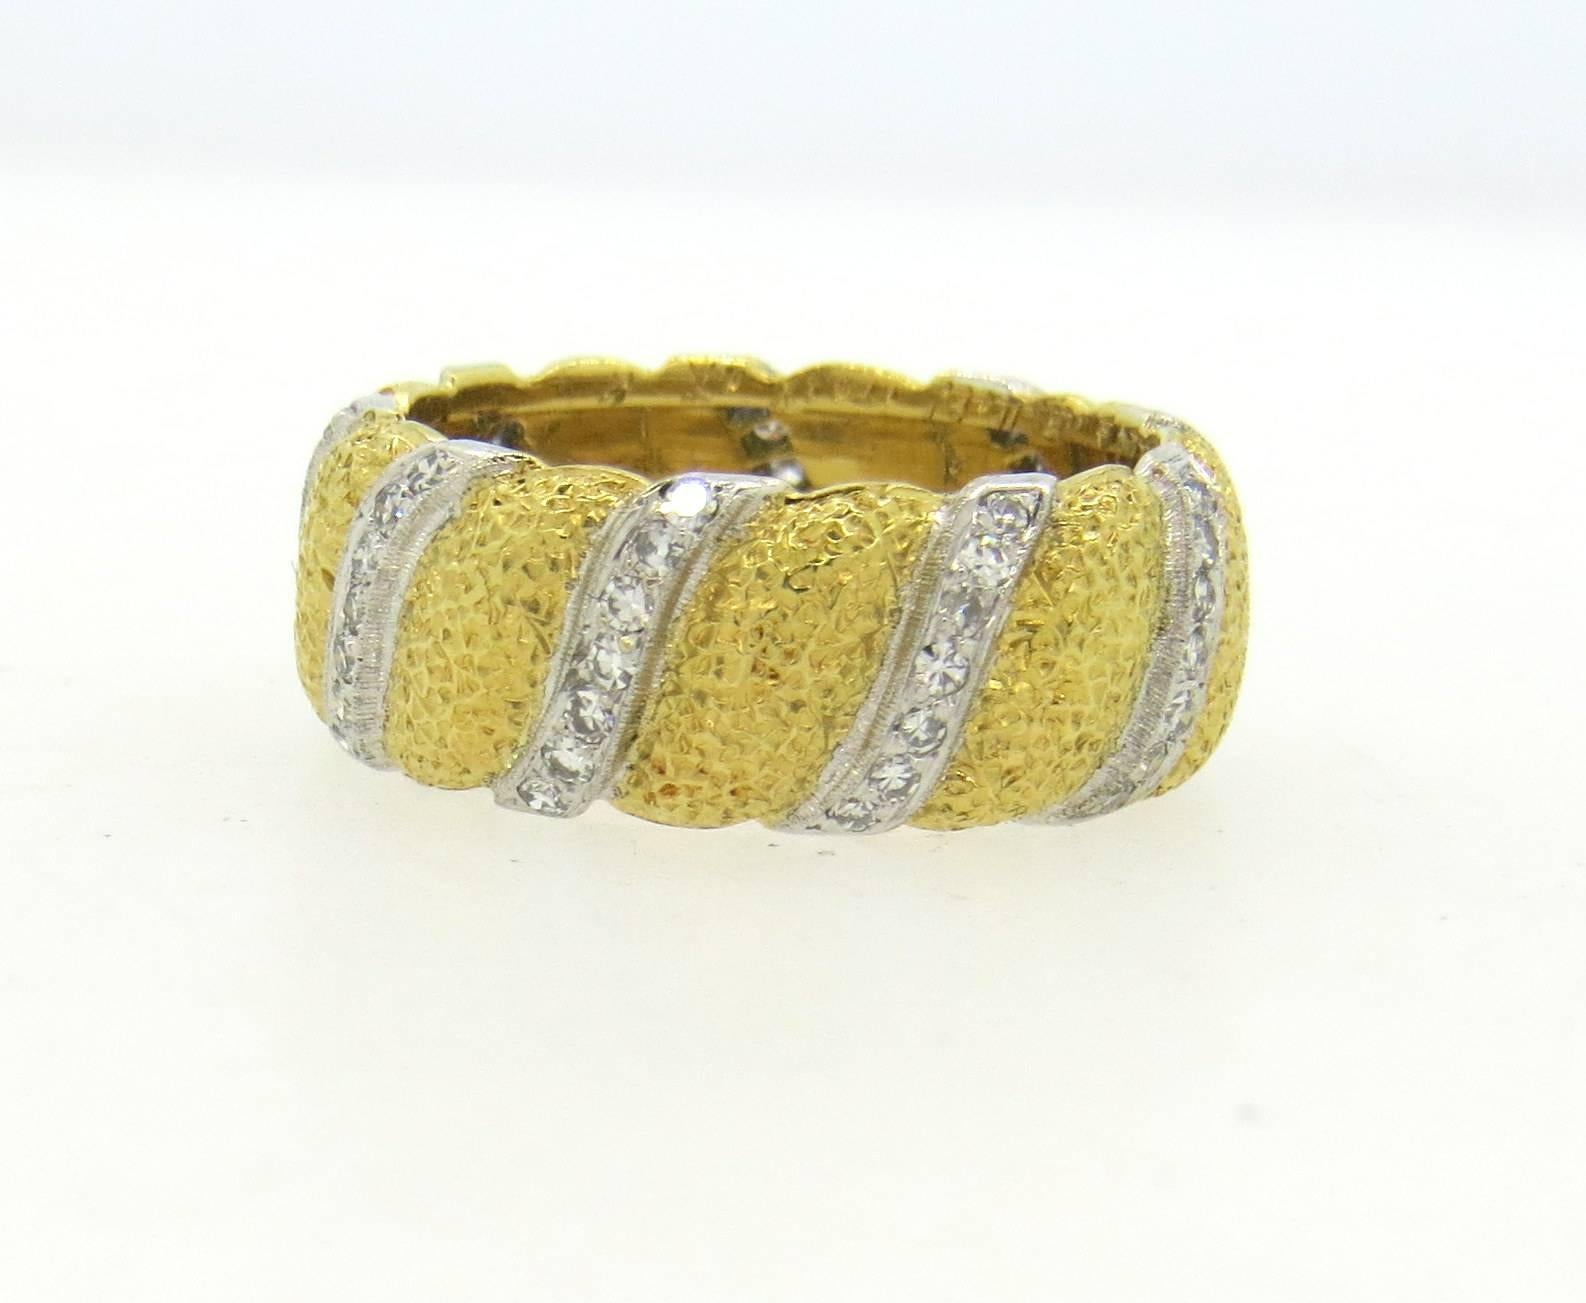 18k yellow gold wedding band ring, crafted by Buccellati, decorated with diamonds. Ring is a size 5, ring is 7.8mm wide.  Marked: Gianmaria Buccellati, 750. Weight of the piece - 8.6 grams